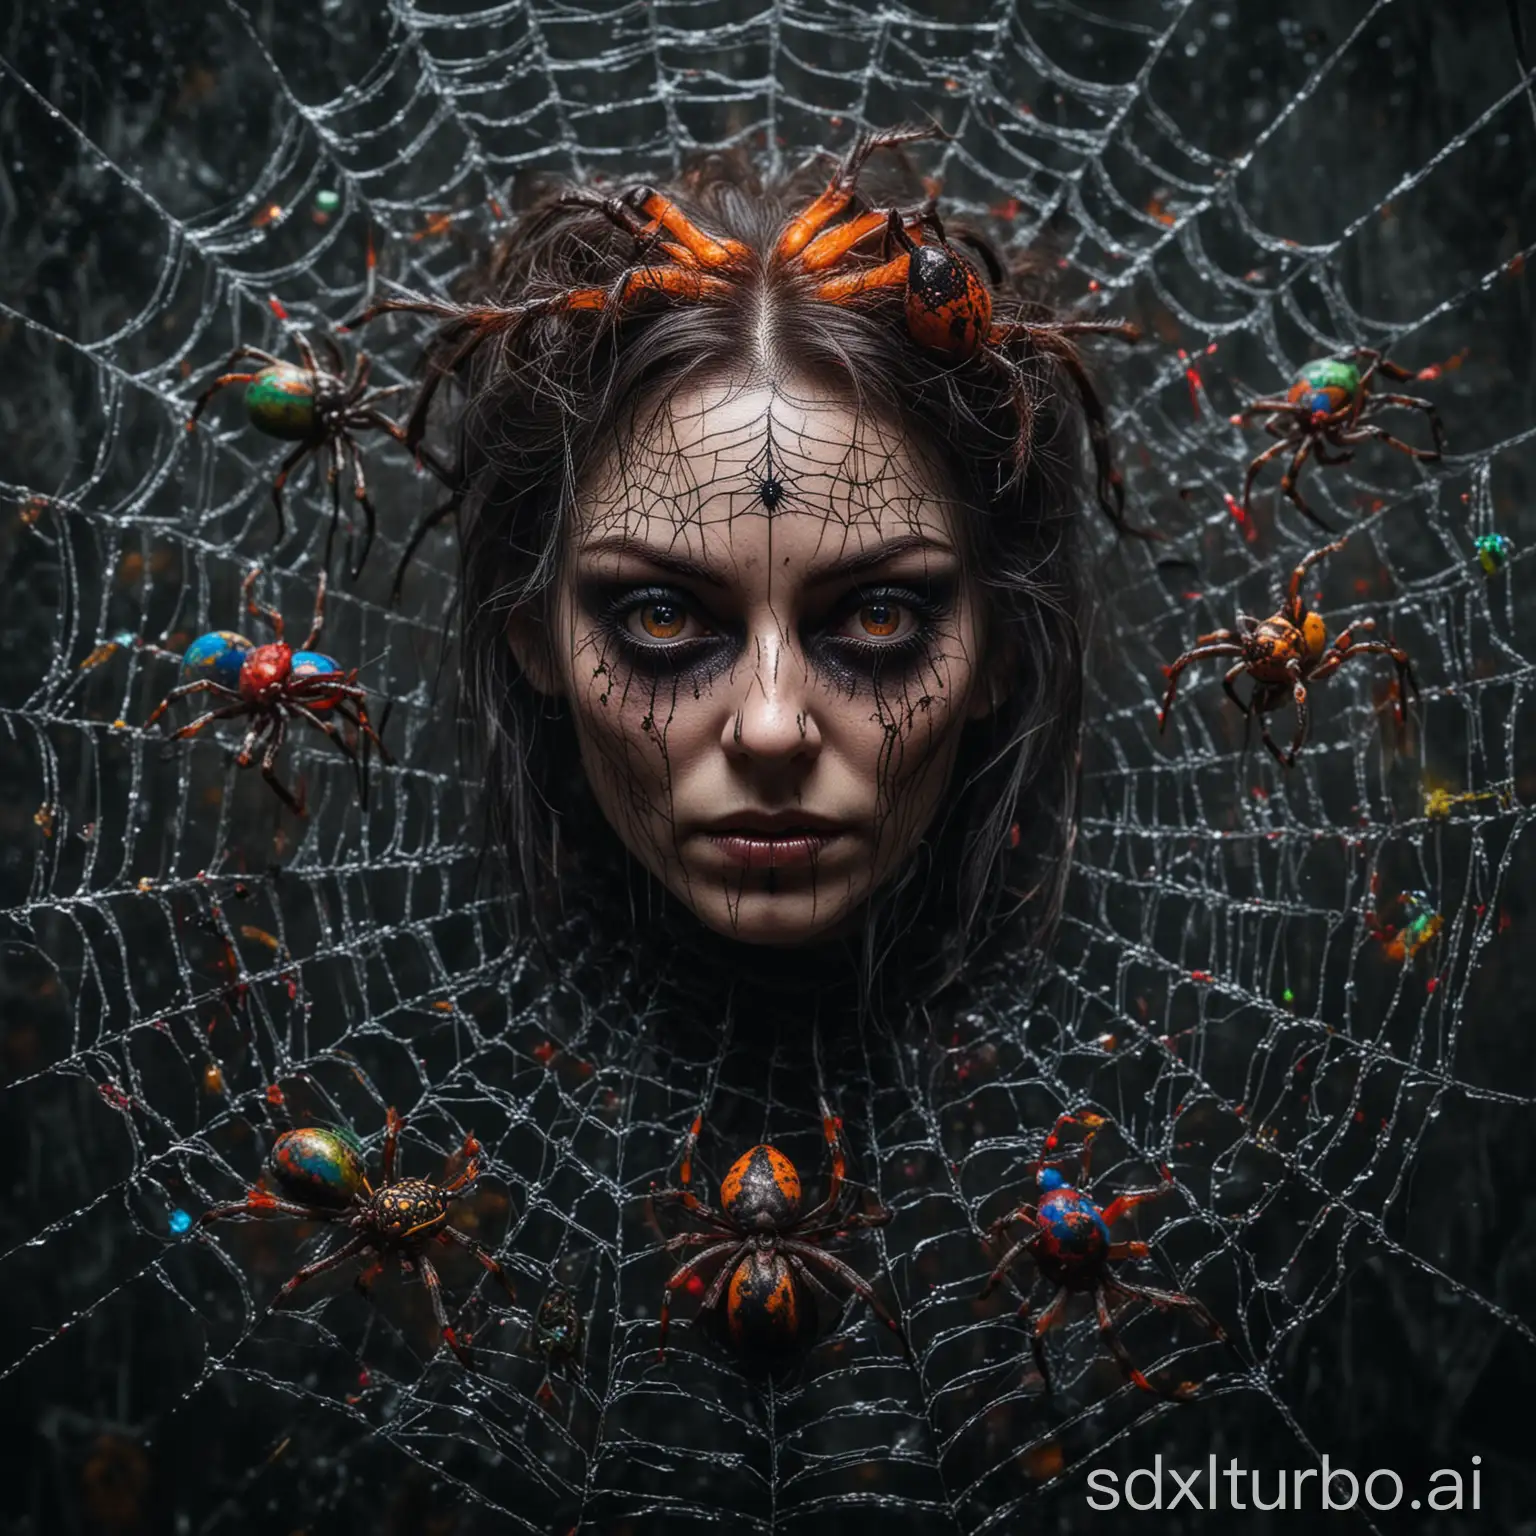 Top view, hybrid of a horrific blending of a demonic woman with a colorful spider’s head resting in a spider's web with tiny spiders running around. Spooky. Alluring and grotesque.